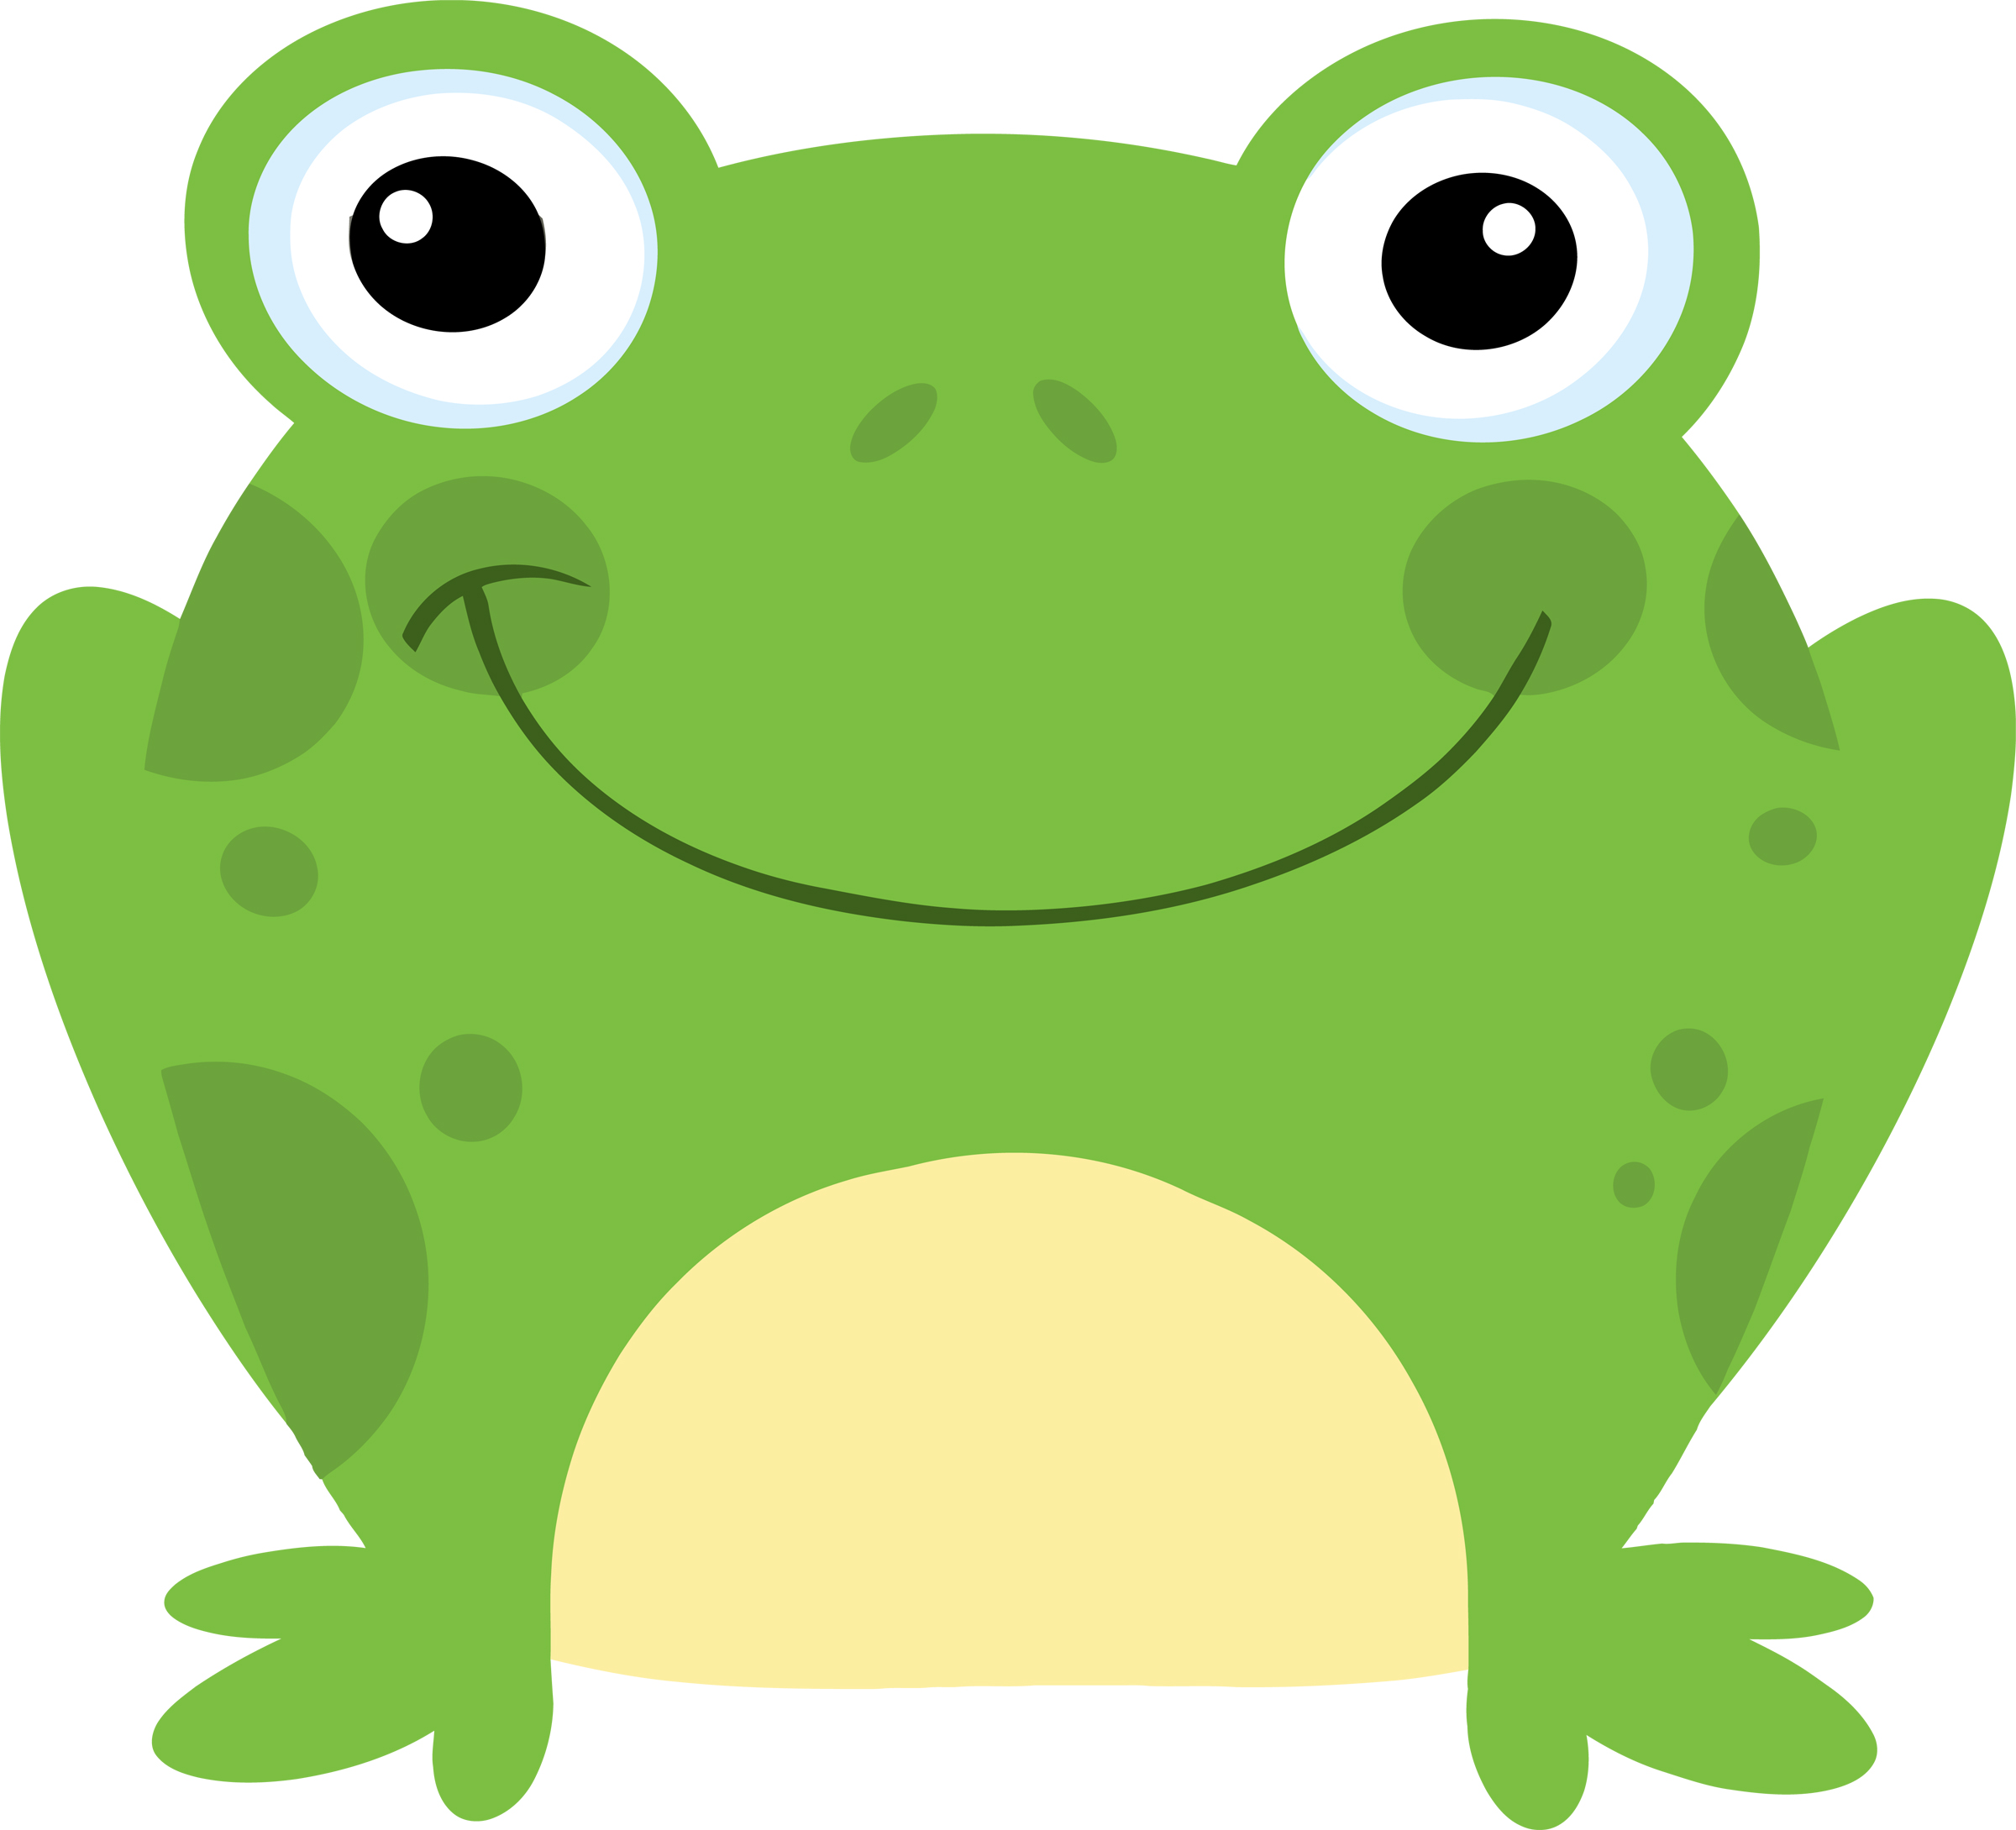 Frog clip art vector clipart cliparts for you 2